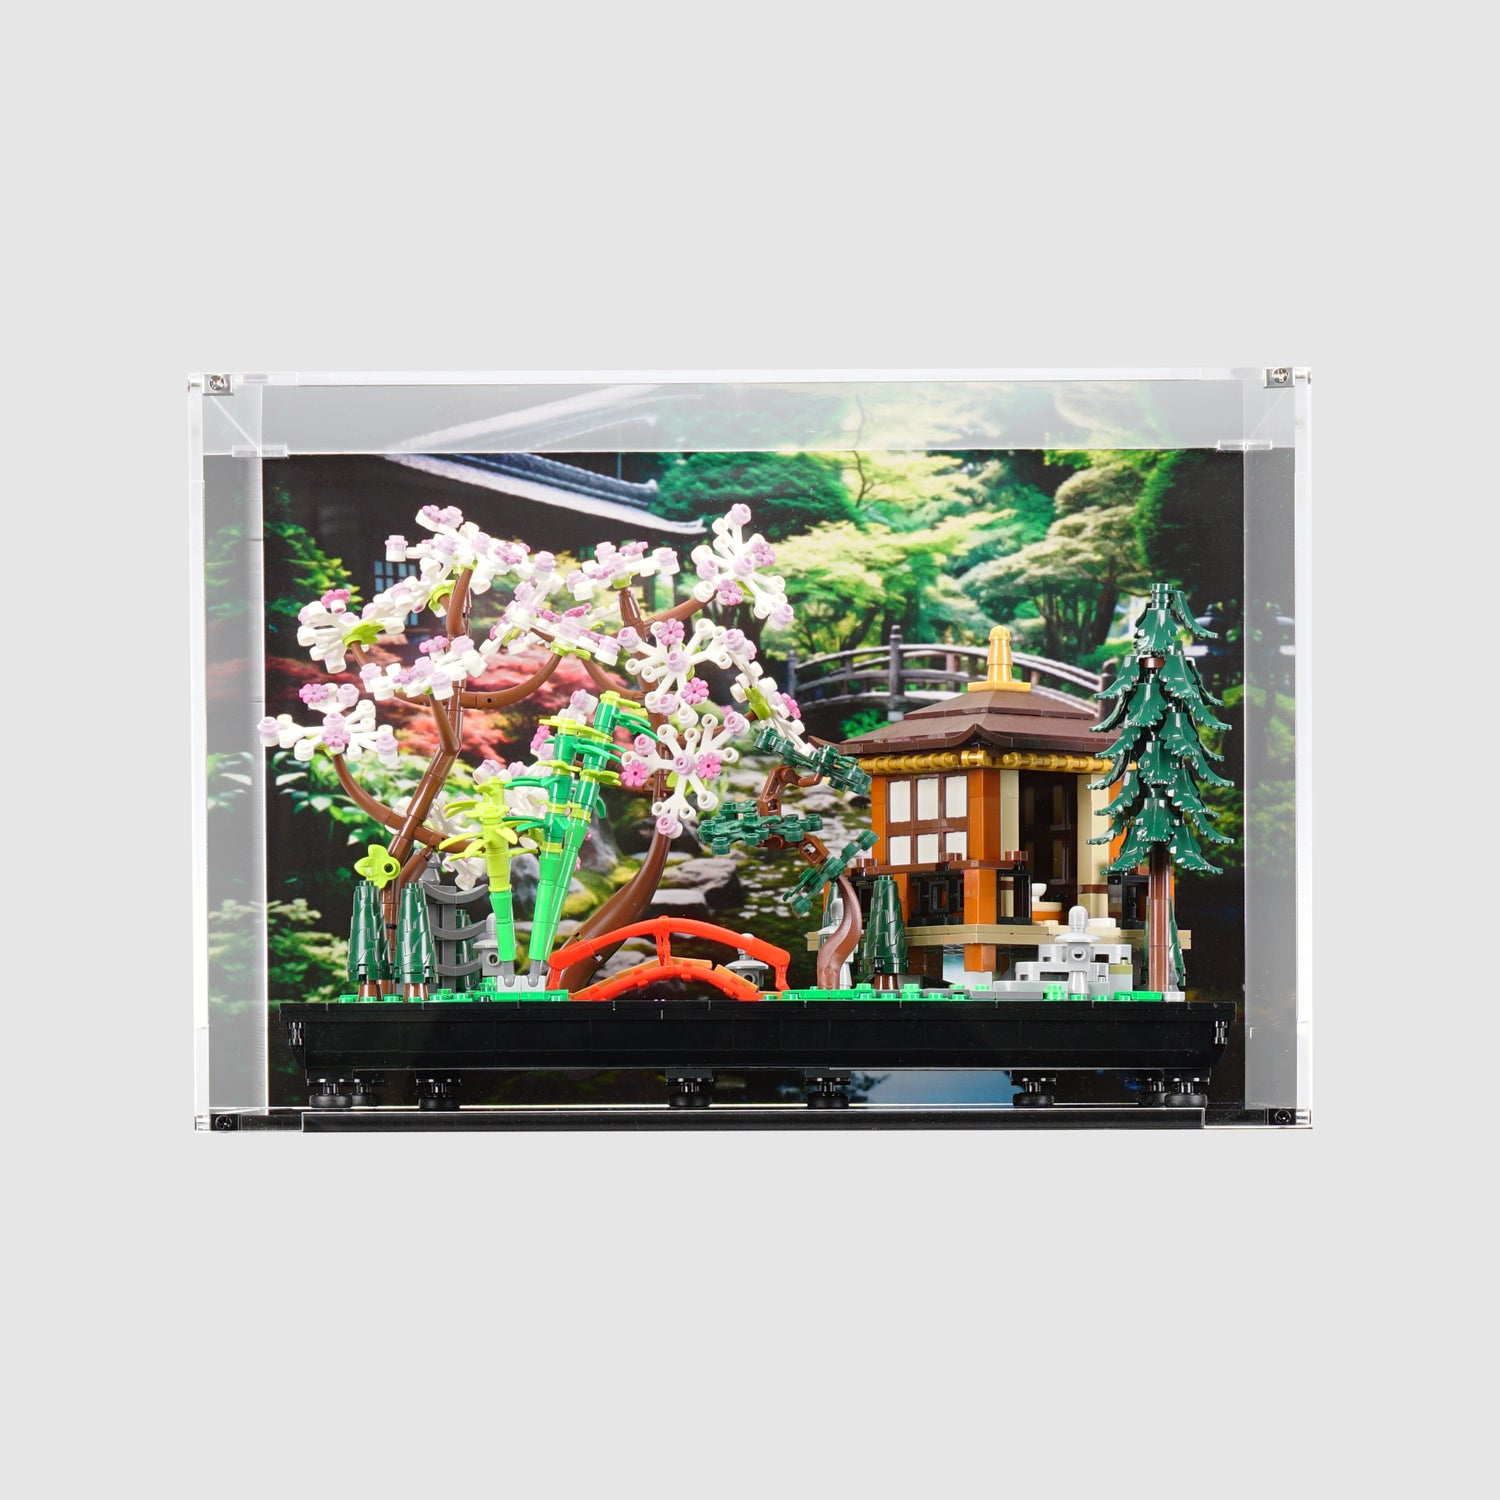 Acrylic Displays for your Lego Models-Lego 10311 Orchid Display Case